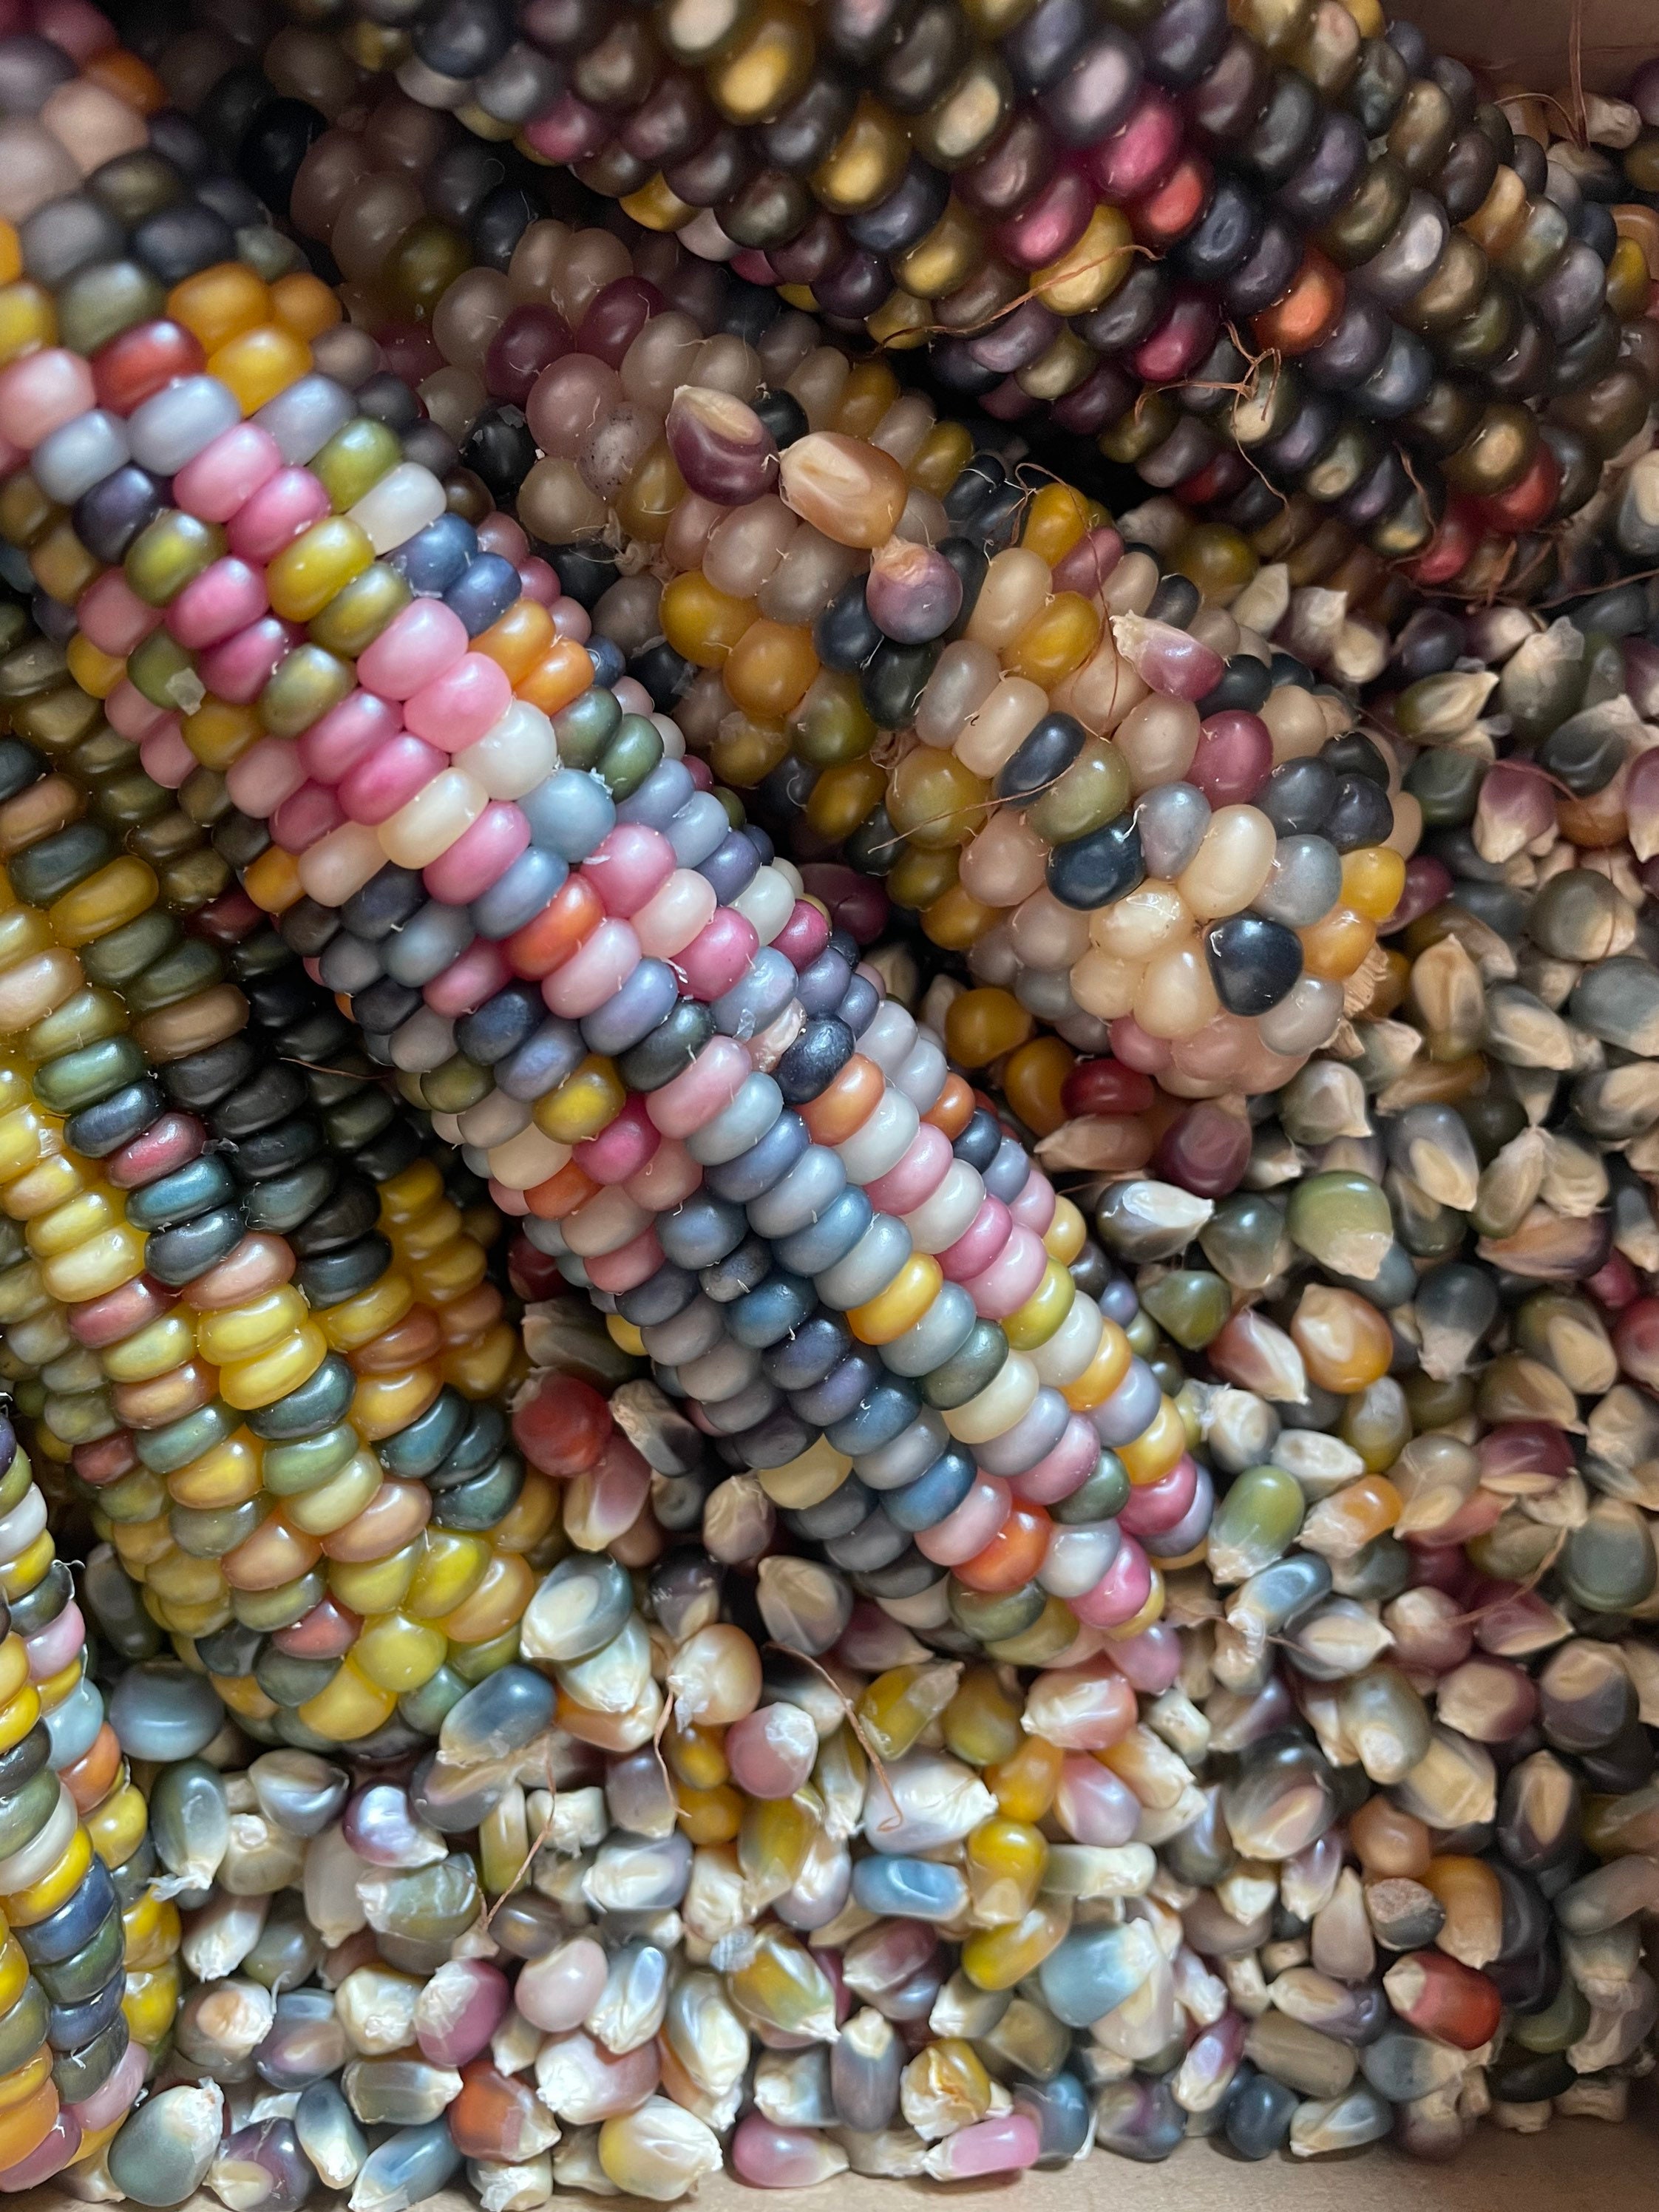 40 Corn Vegetable Seeds Mixed Glass Stone Grain Heirloom Sweet Colorful Plant 